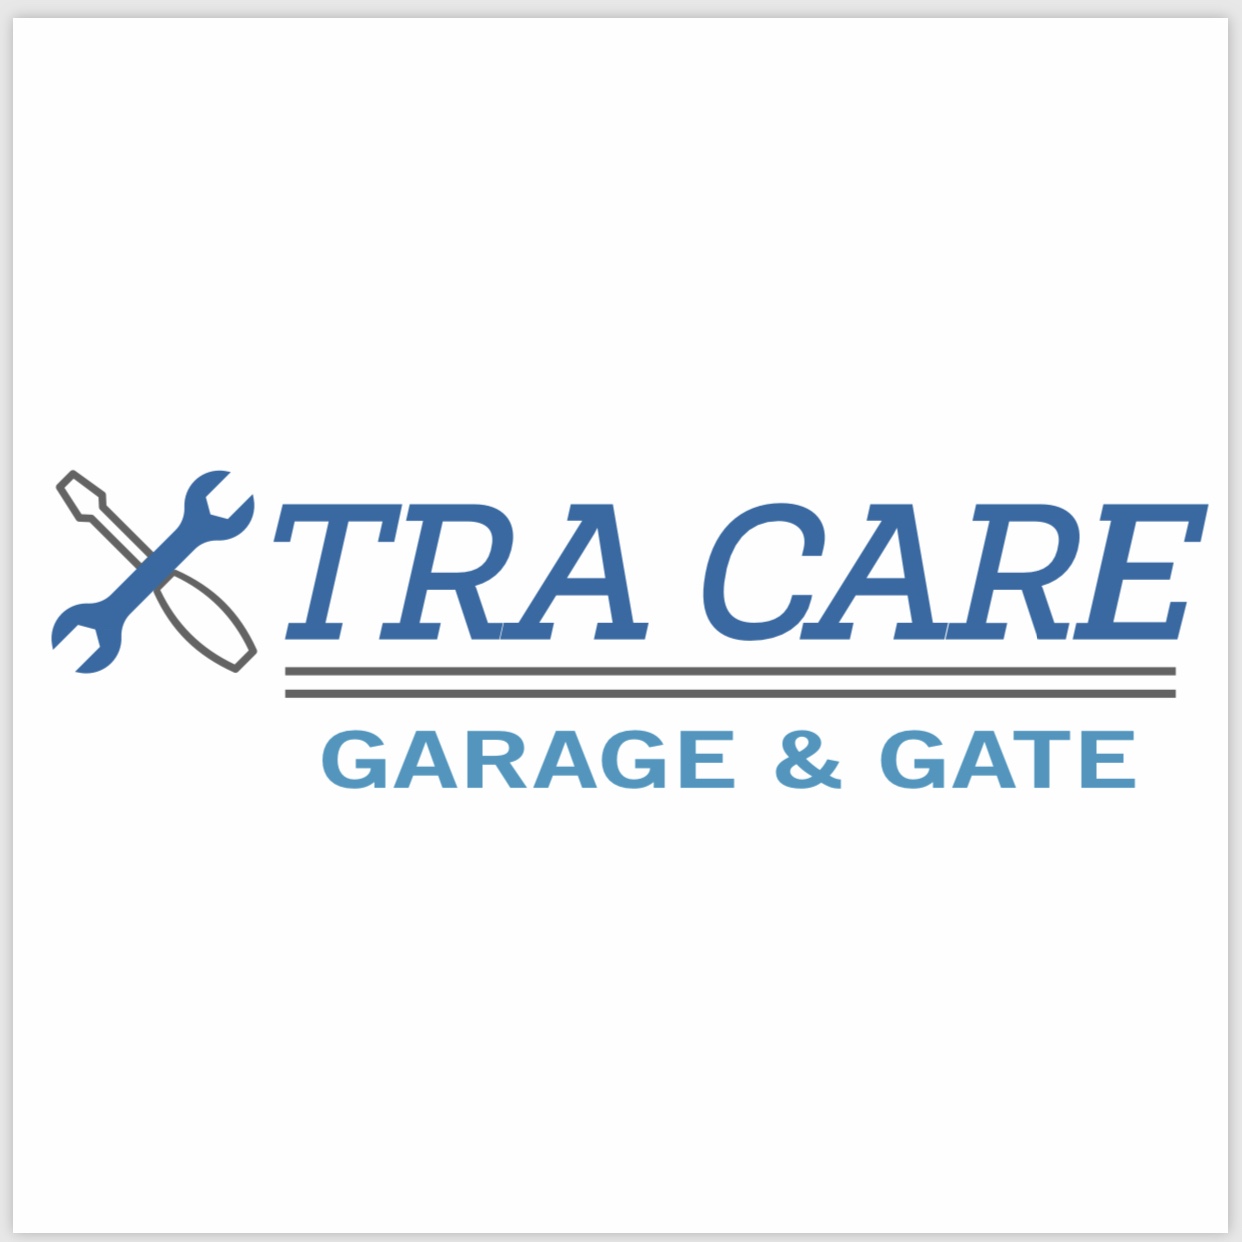 Xtra Care Garage & Gate - Unlicensed Contractor Logo